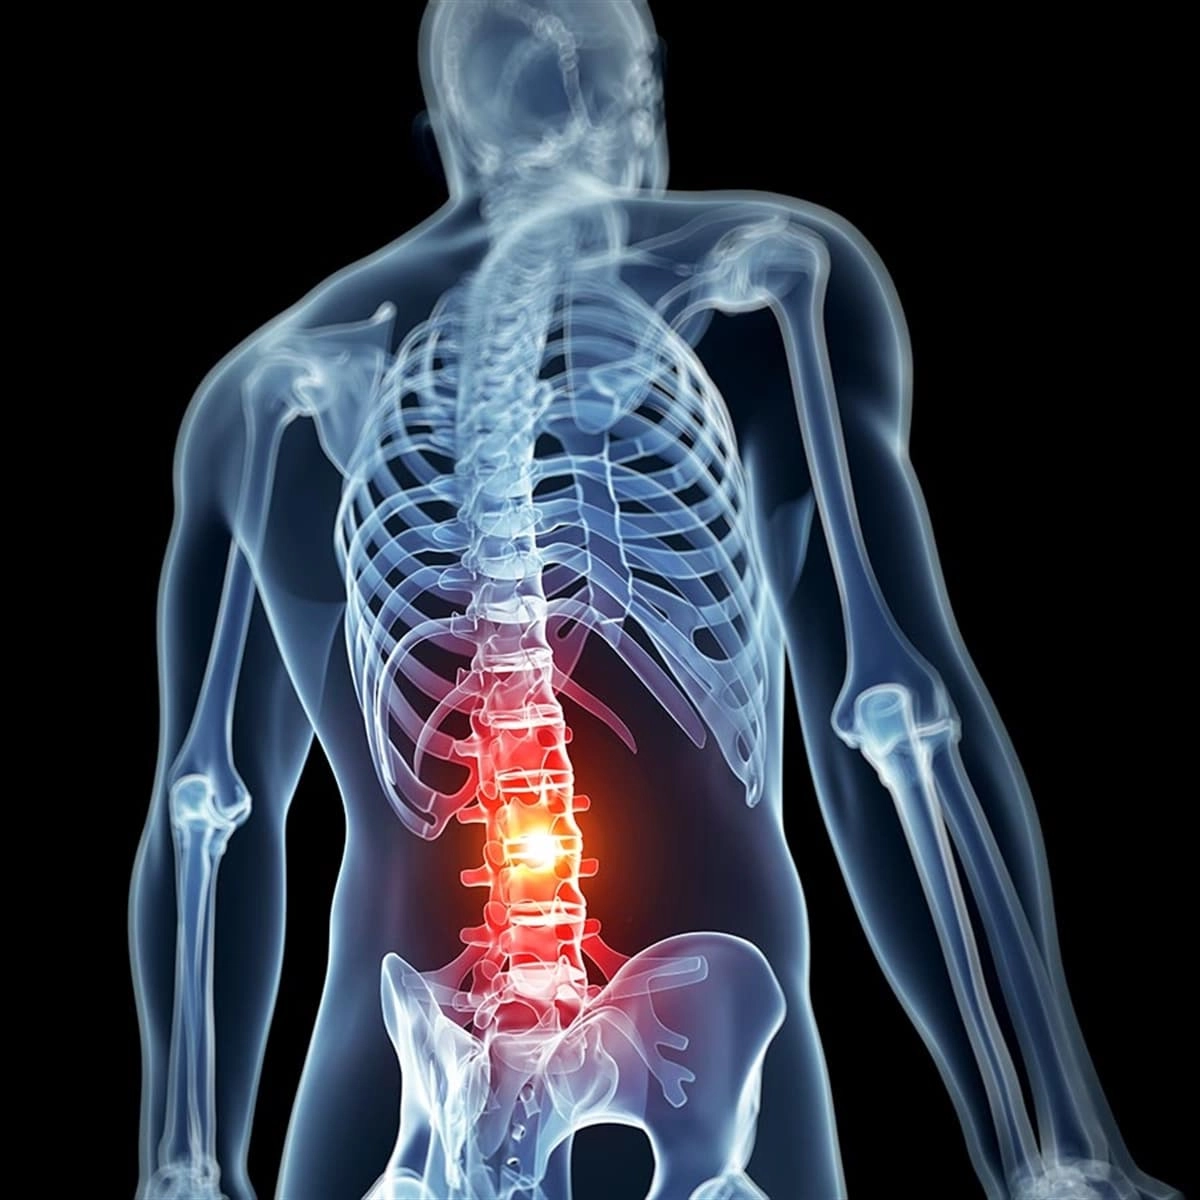 What is a herniated disc in the lower back?